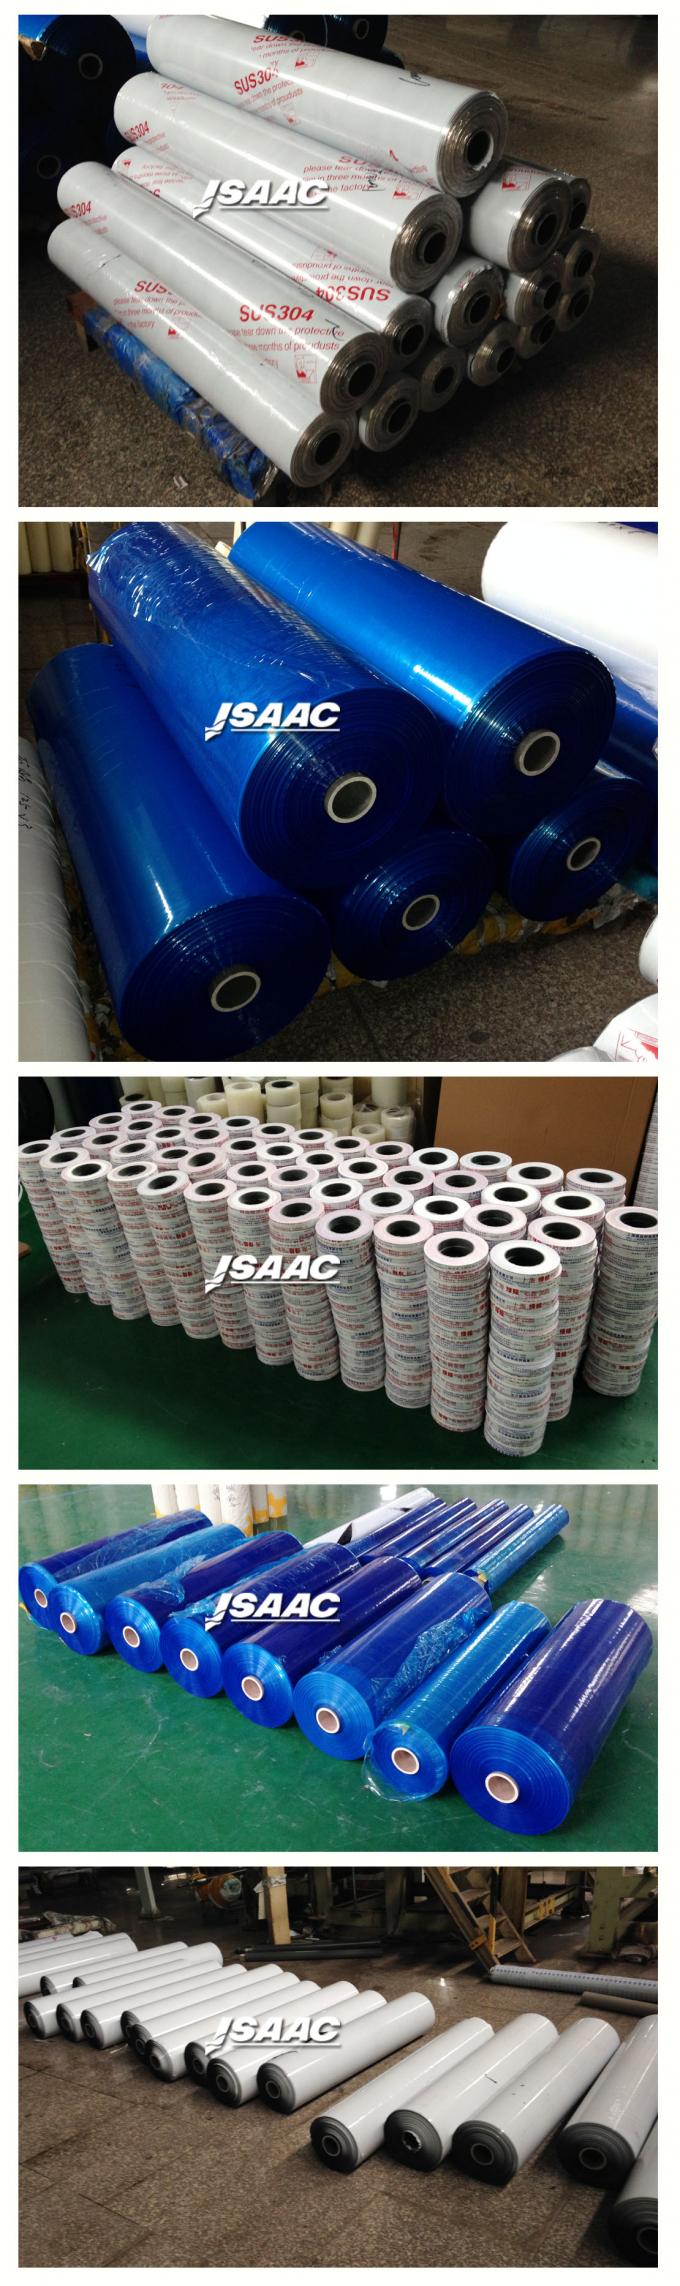 Packaging protection film